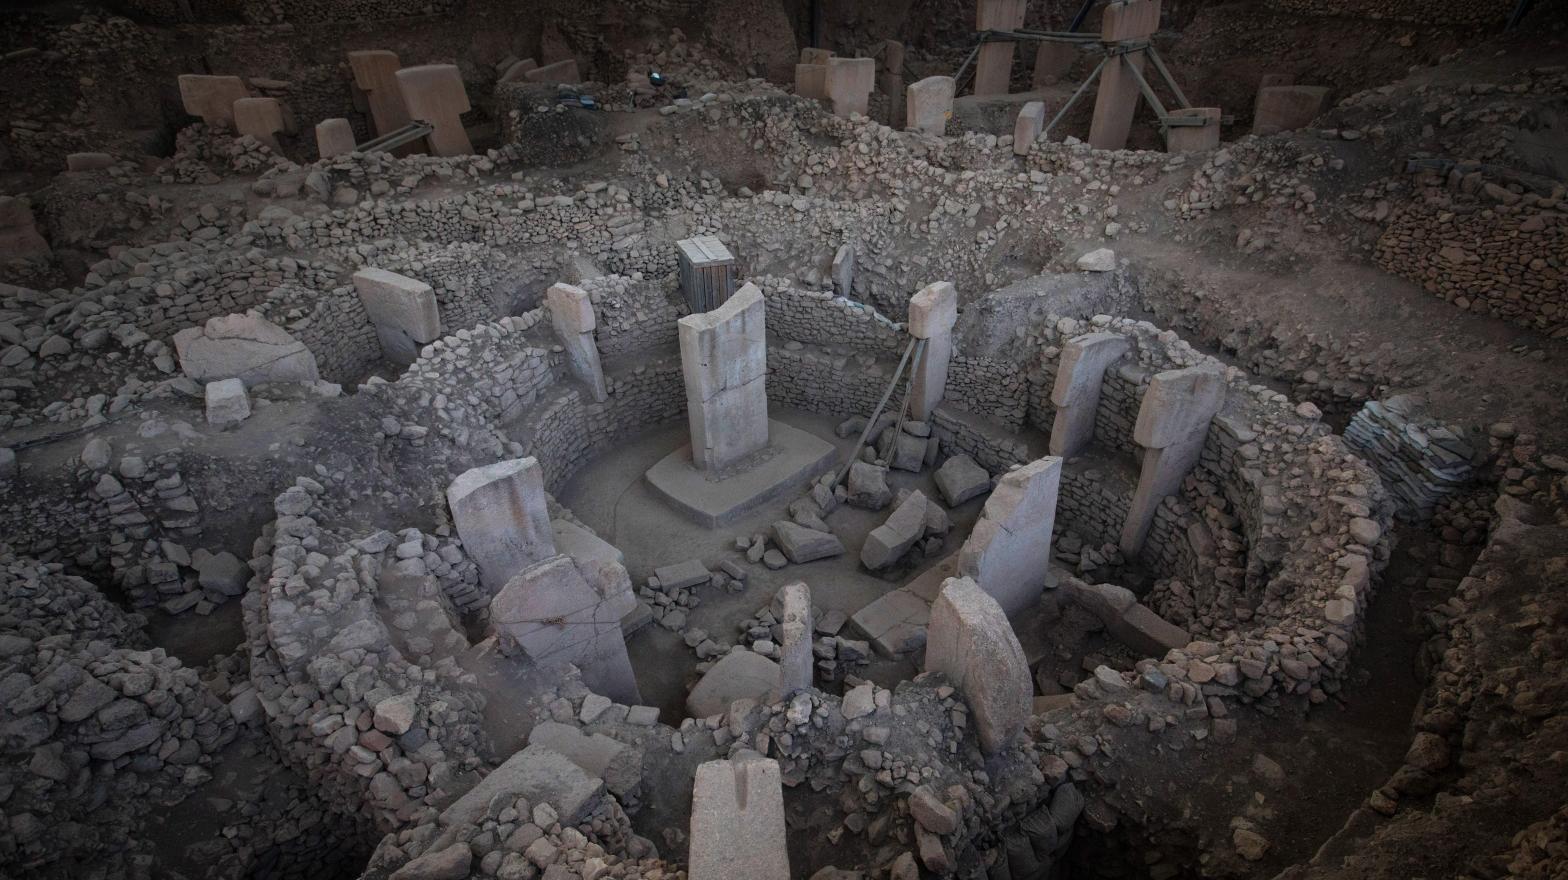 The ancient site of Göbekli Tepe in central Turkey. (Photo: Chris McGrath, Getty Images)